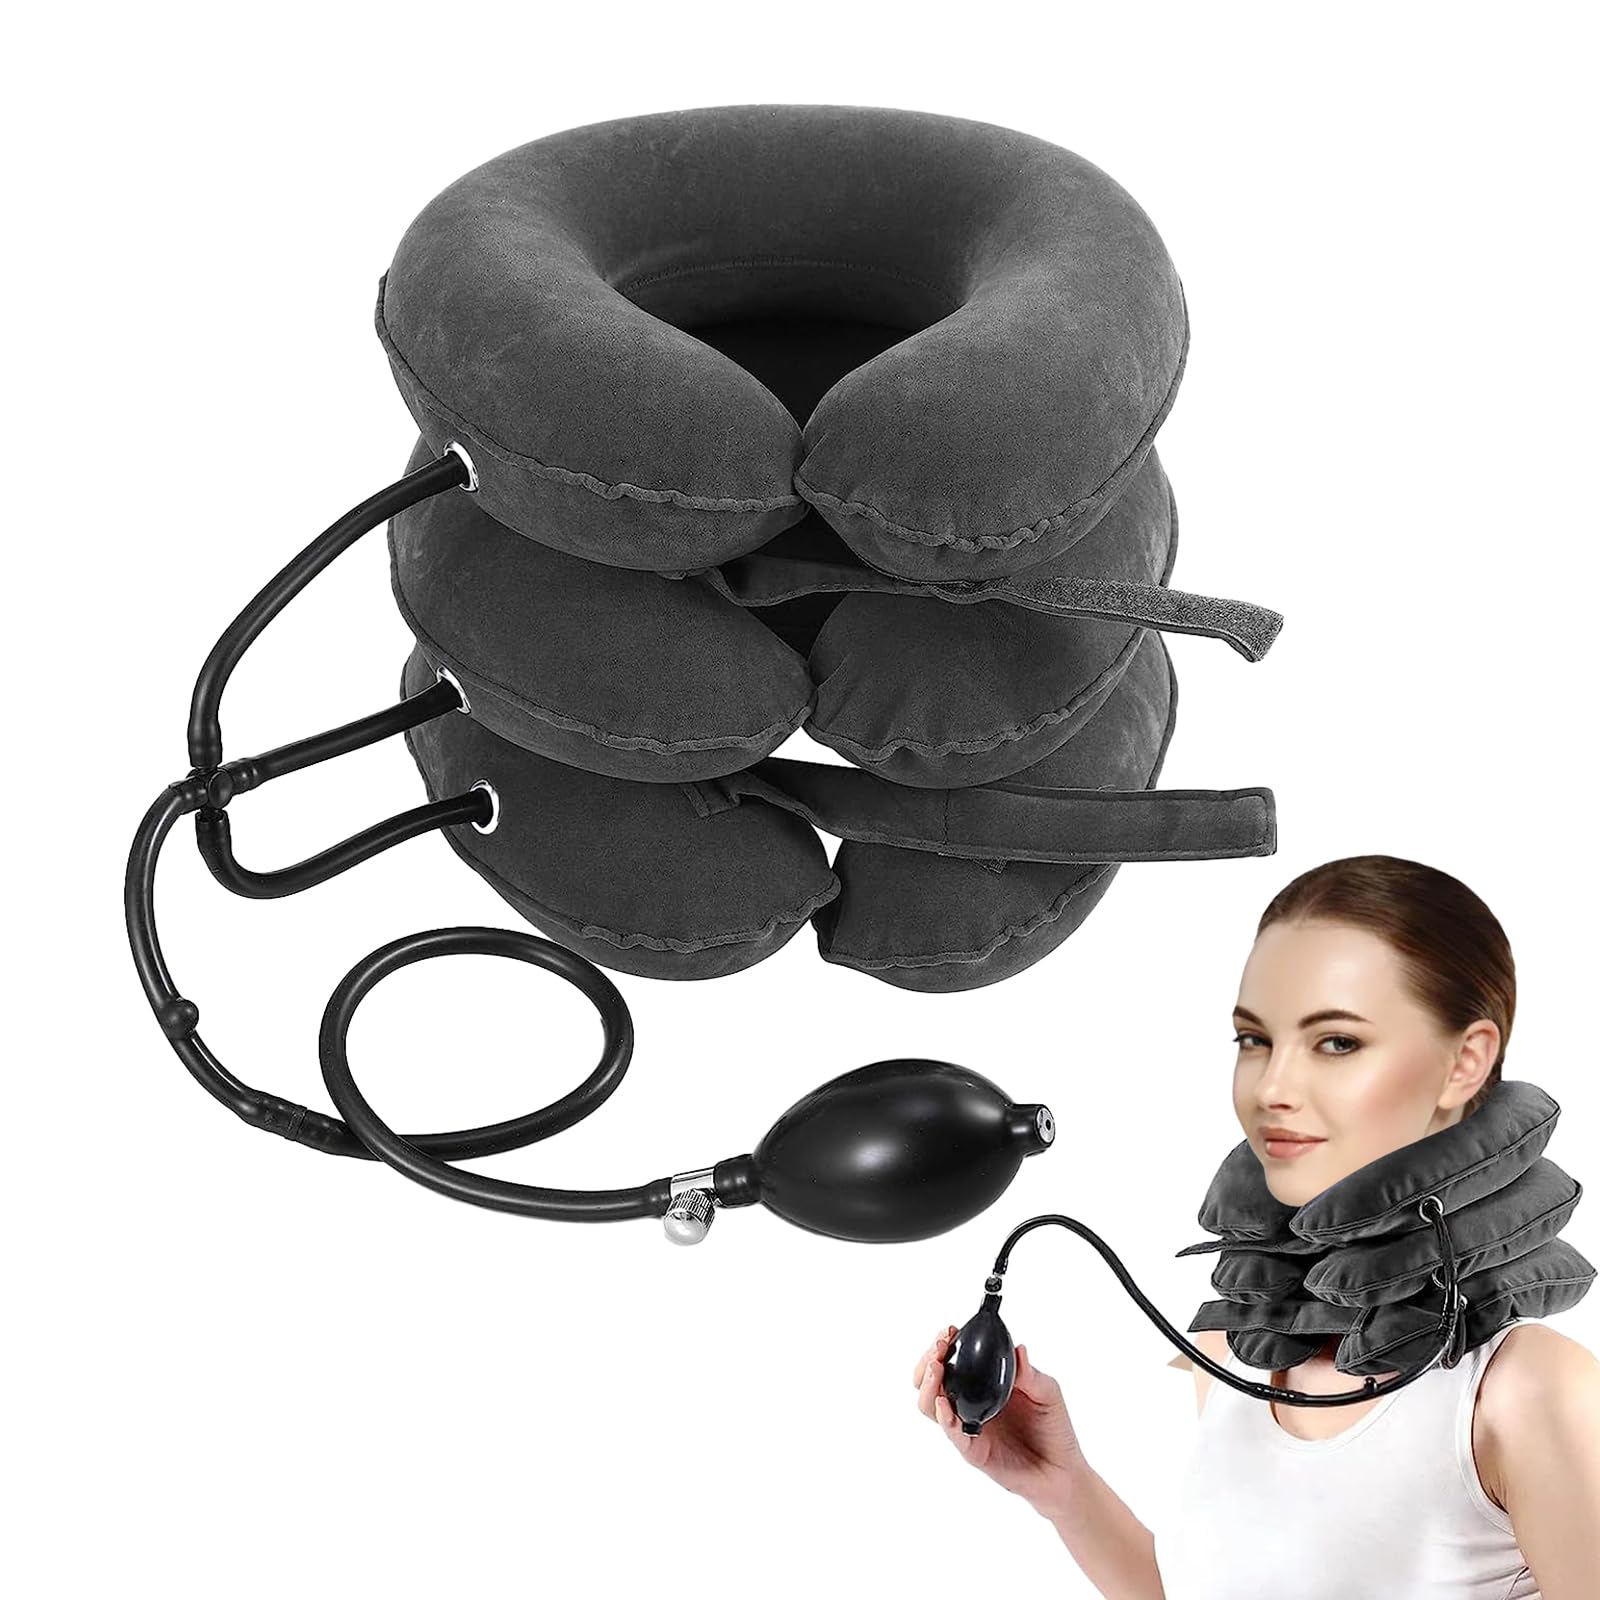 Cervical Neck Traction Device, Neck Stretcher for Neck Pain Relief, Neck Traction Device for Home Use, Neck Decompression Devices, Inflatable Stretcher, Neck Brace & Neck Decompression